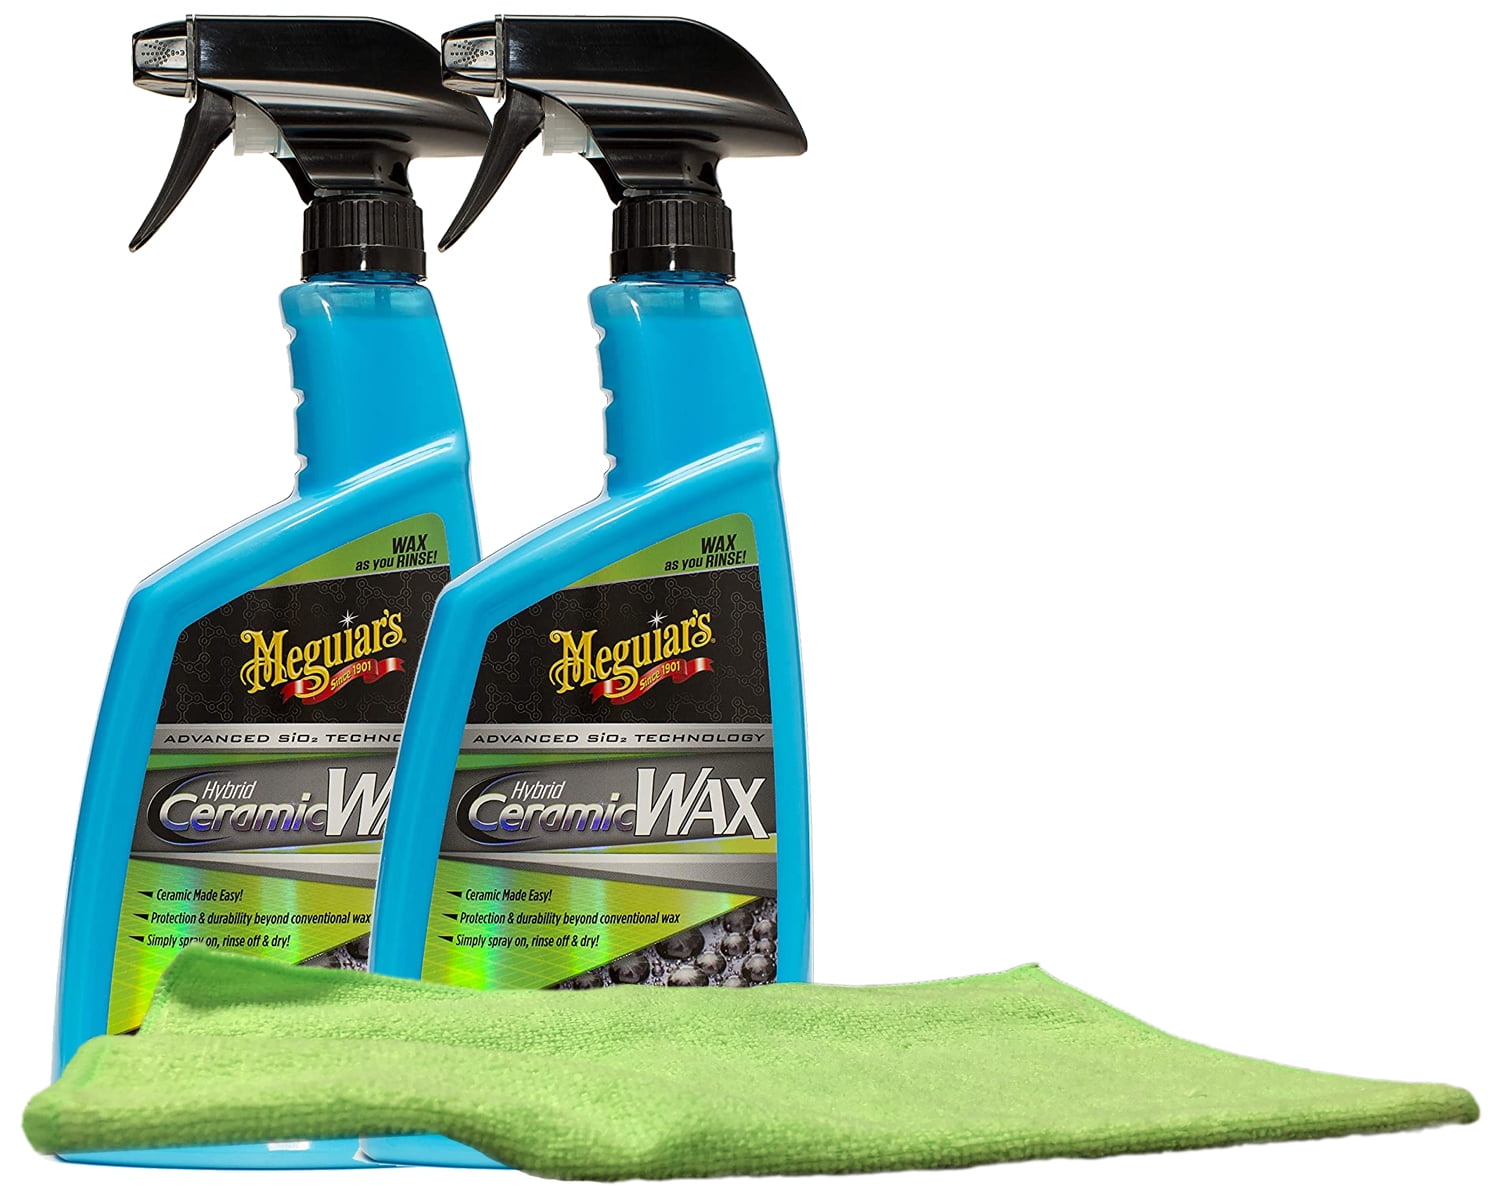 Meguiar's - How do you use Hybrid Ceramic Spray Wax, as a stand-alone  protectant or as a topper over another wax or sealant? #meguiars  #hybridceramic #SiO2 #carwax #spraywax